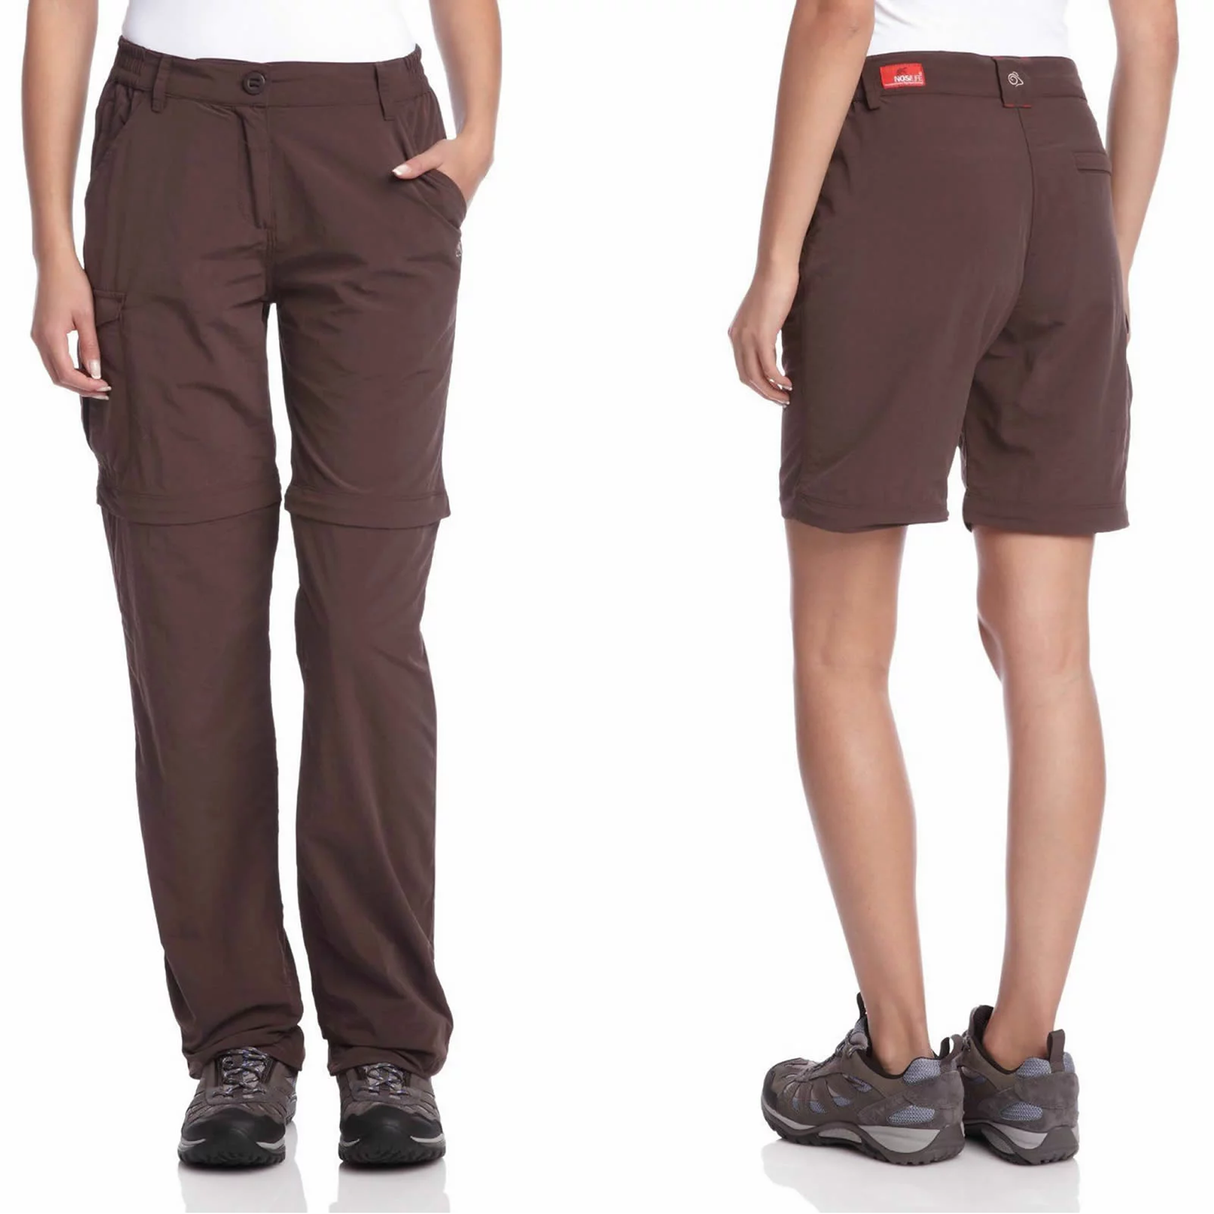 Craghoppers NosiLife Convertible Lightweight Walking Trousers